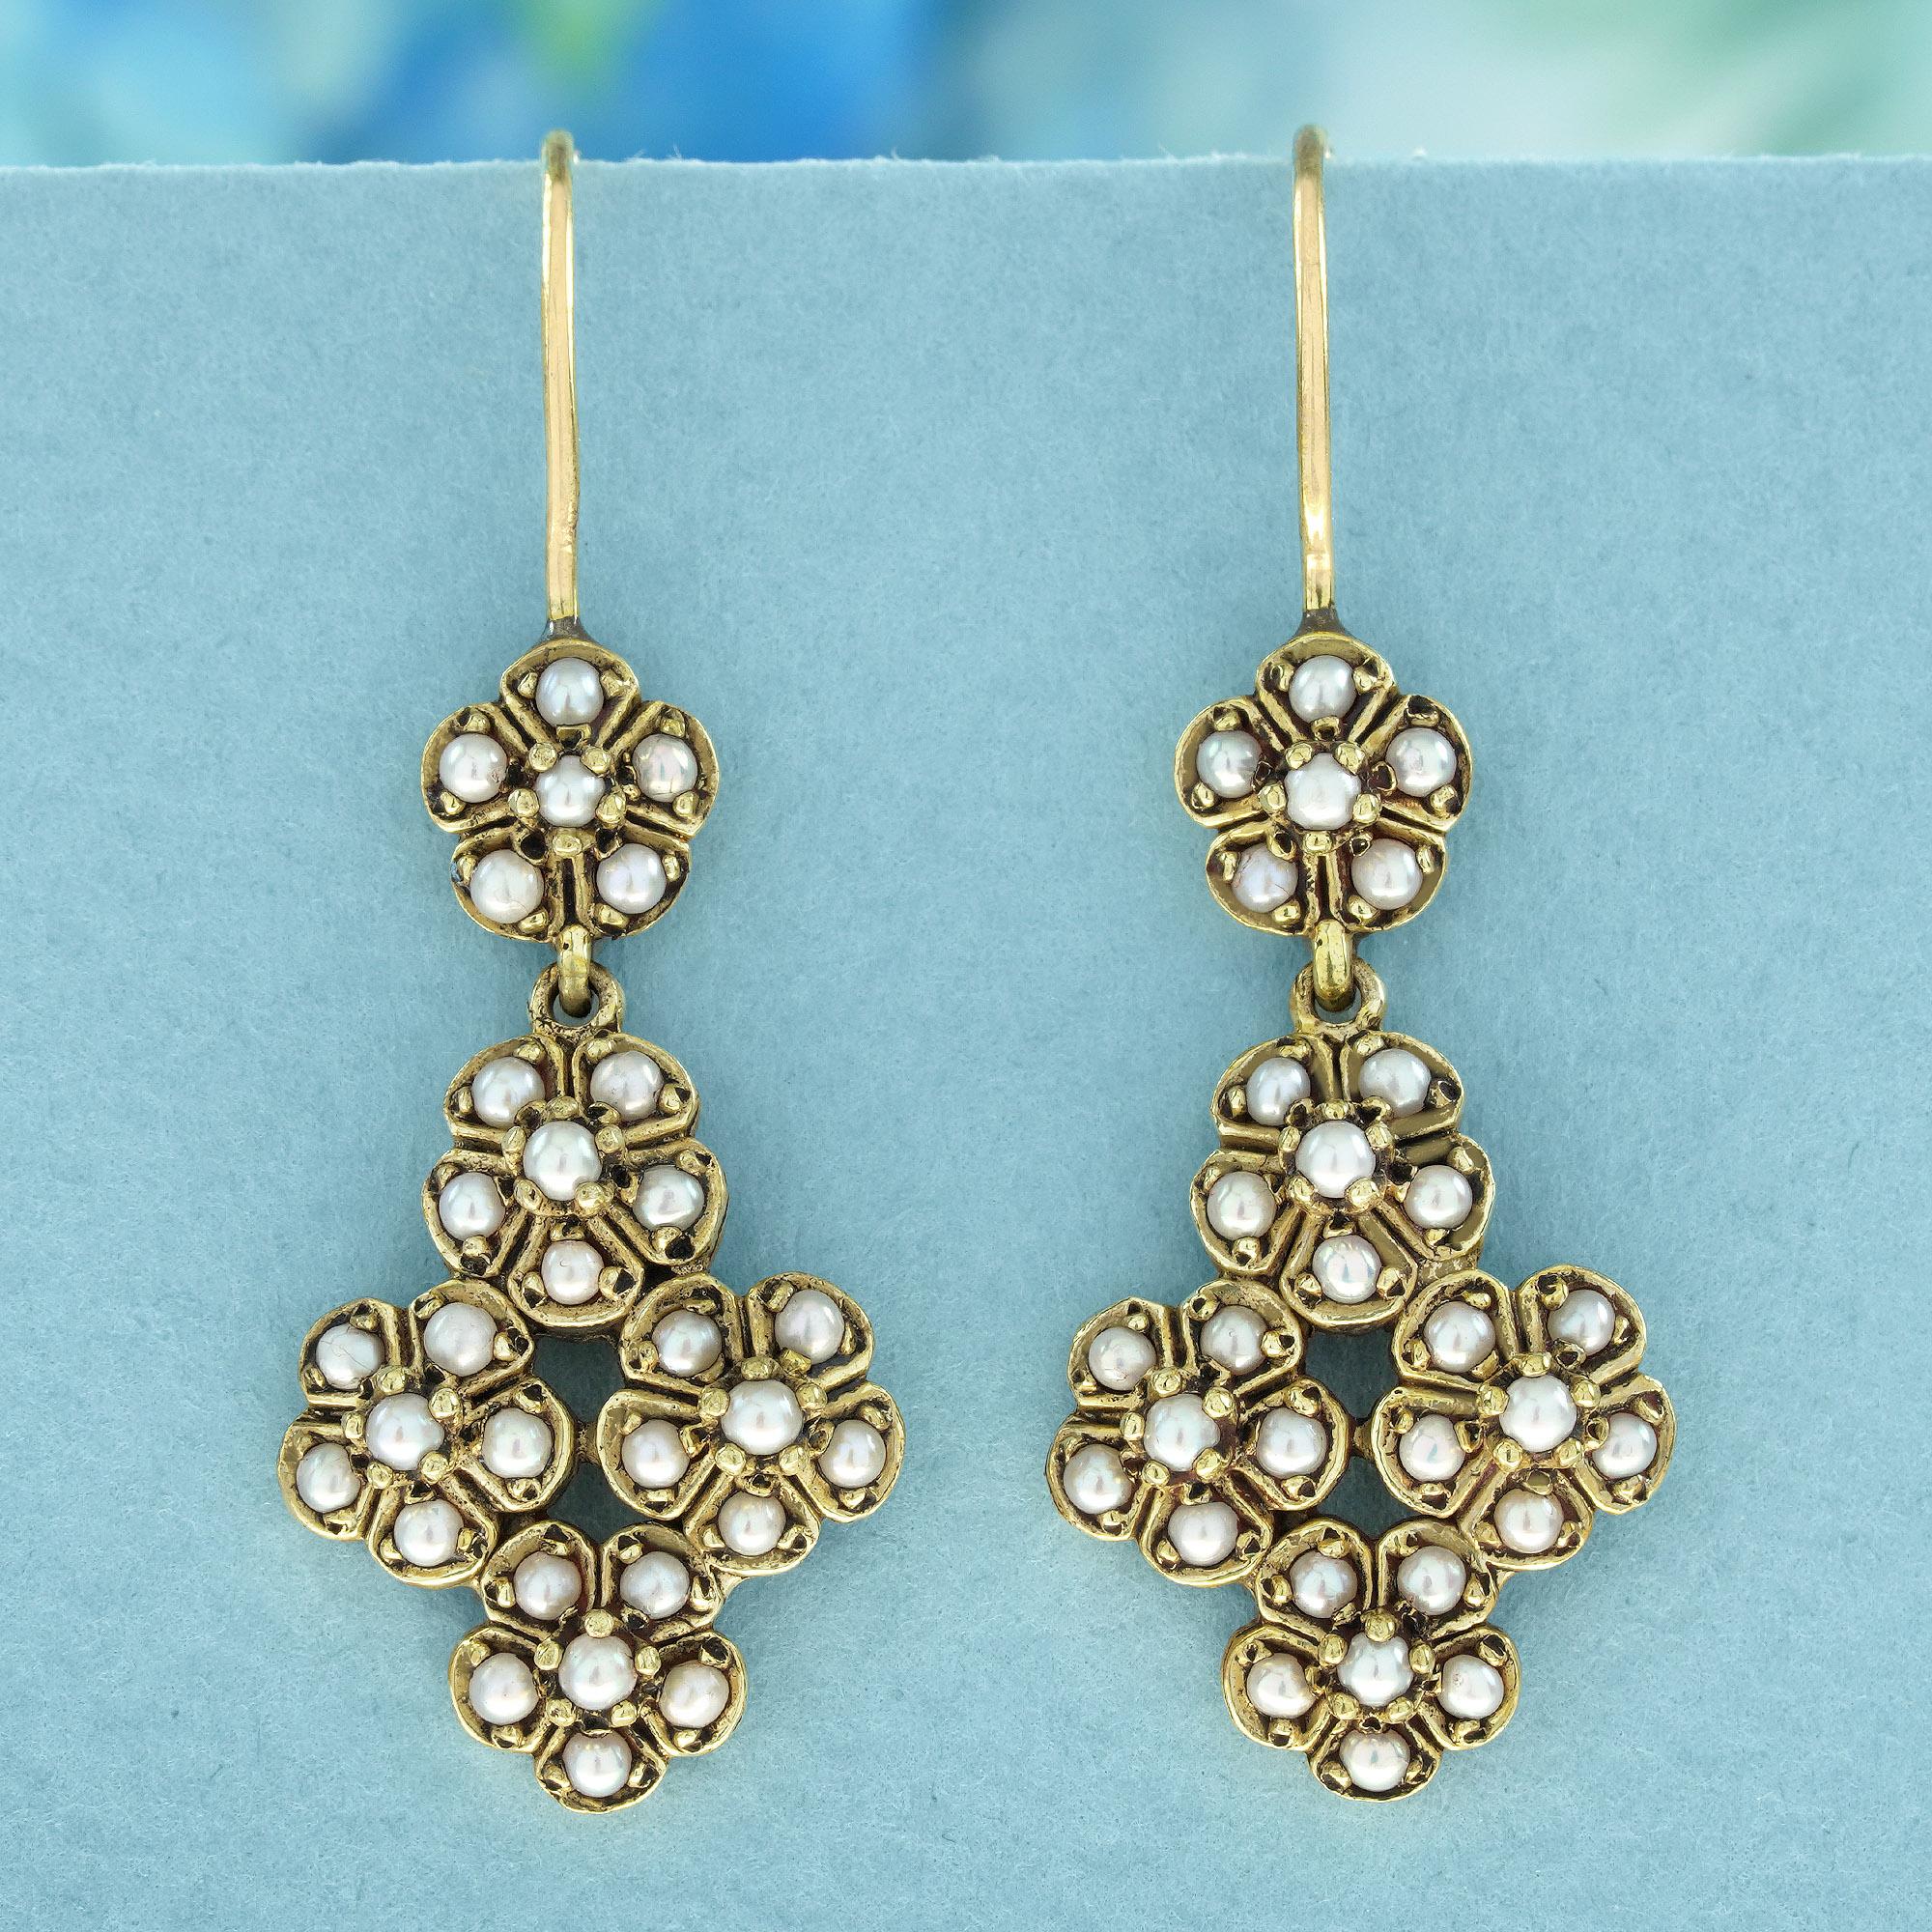 These dangling earrings feature a charming floral design crafted from yellow gold frames, delicately forming petals and leaves reminiscent of blooming clusters of flowers. Each earring is adorned with round white pearls in prong settings,